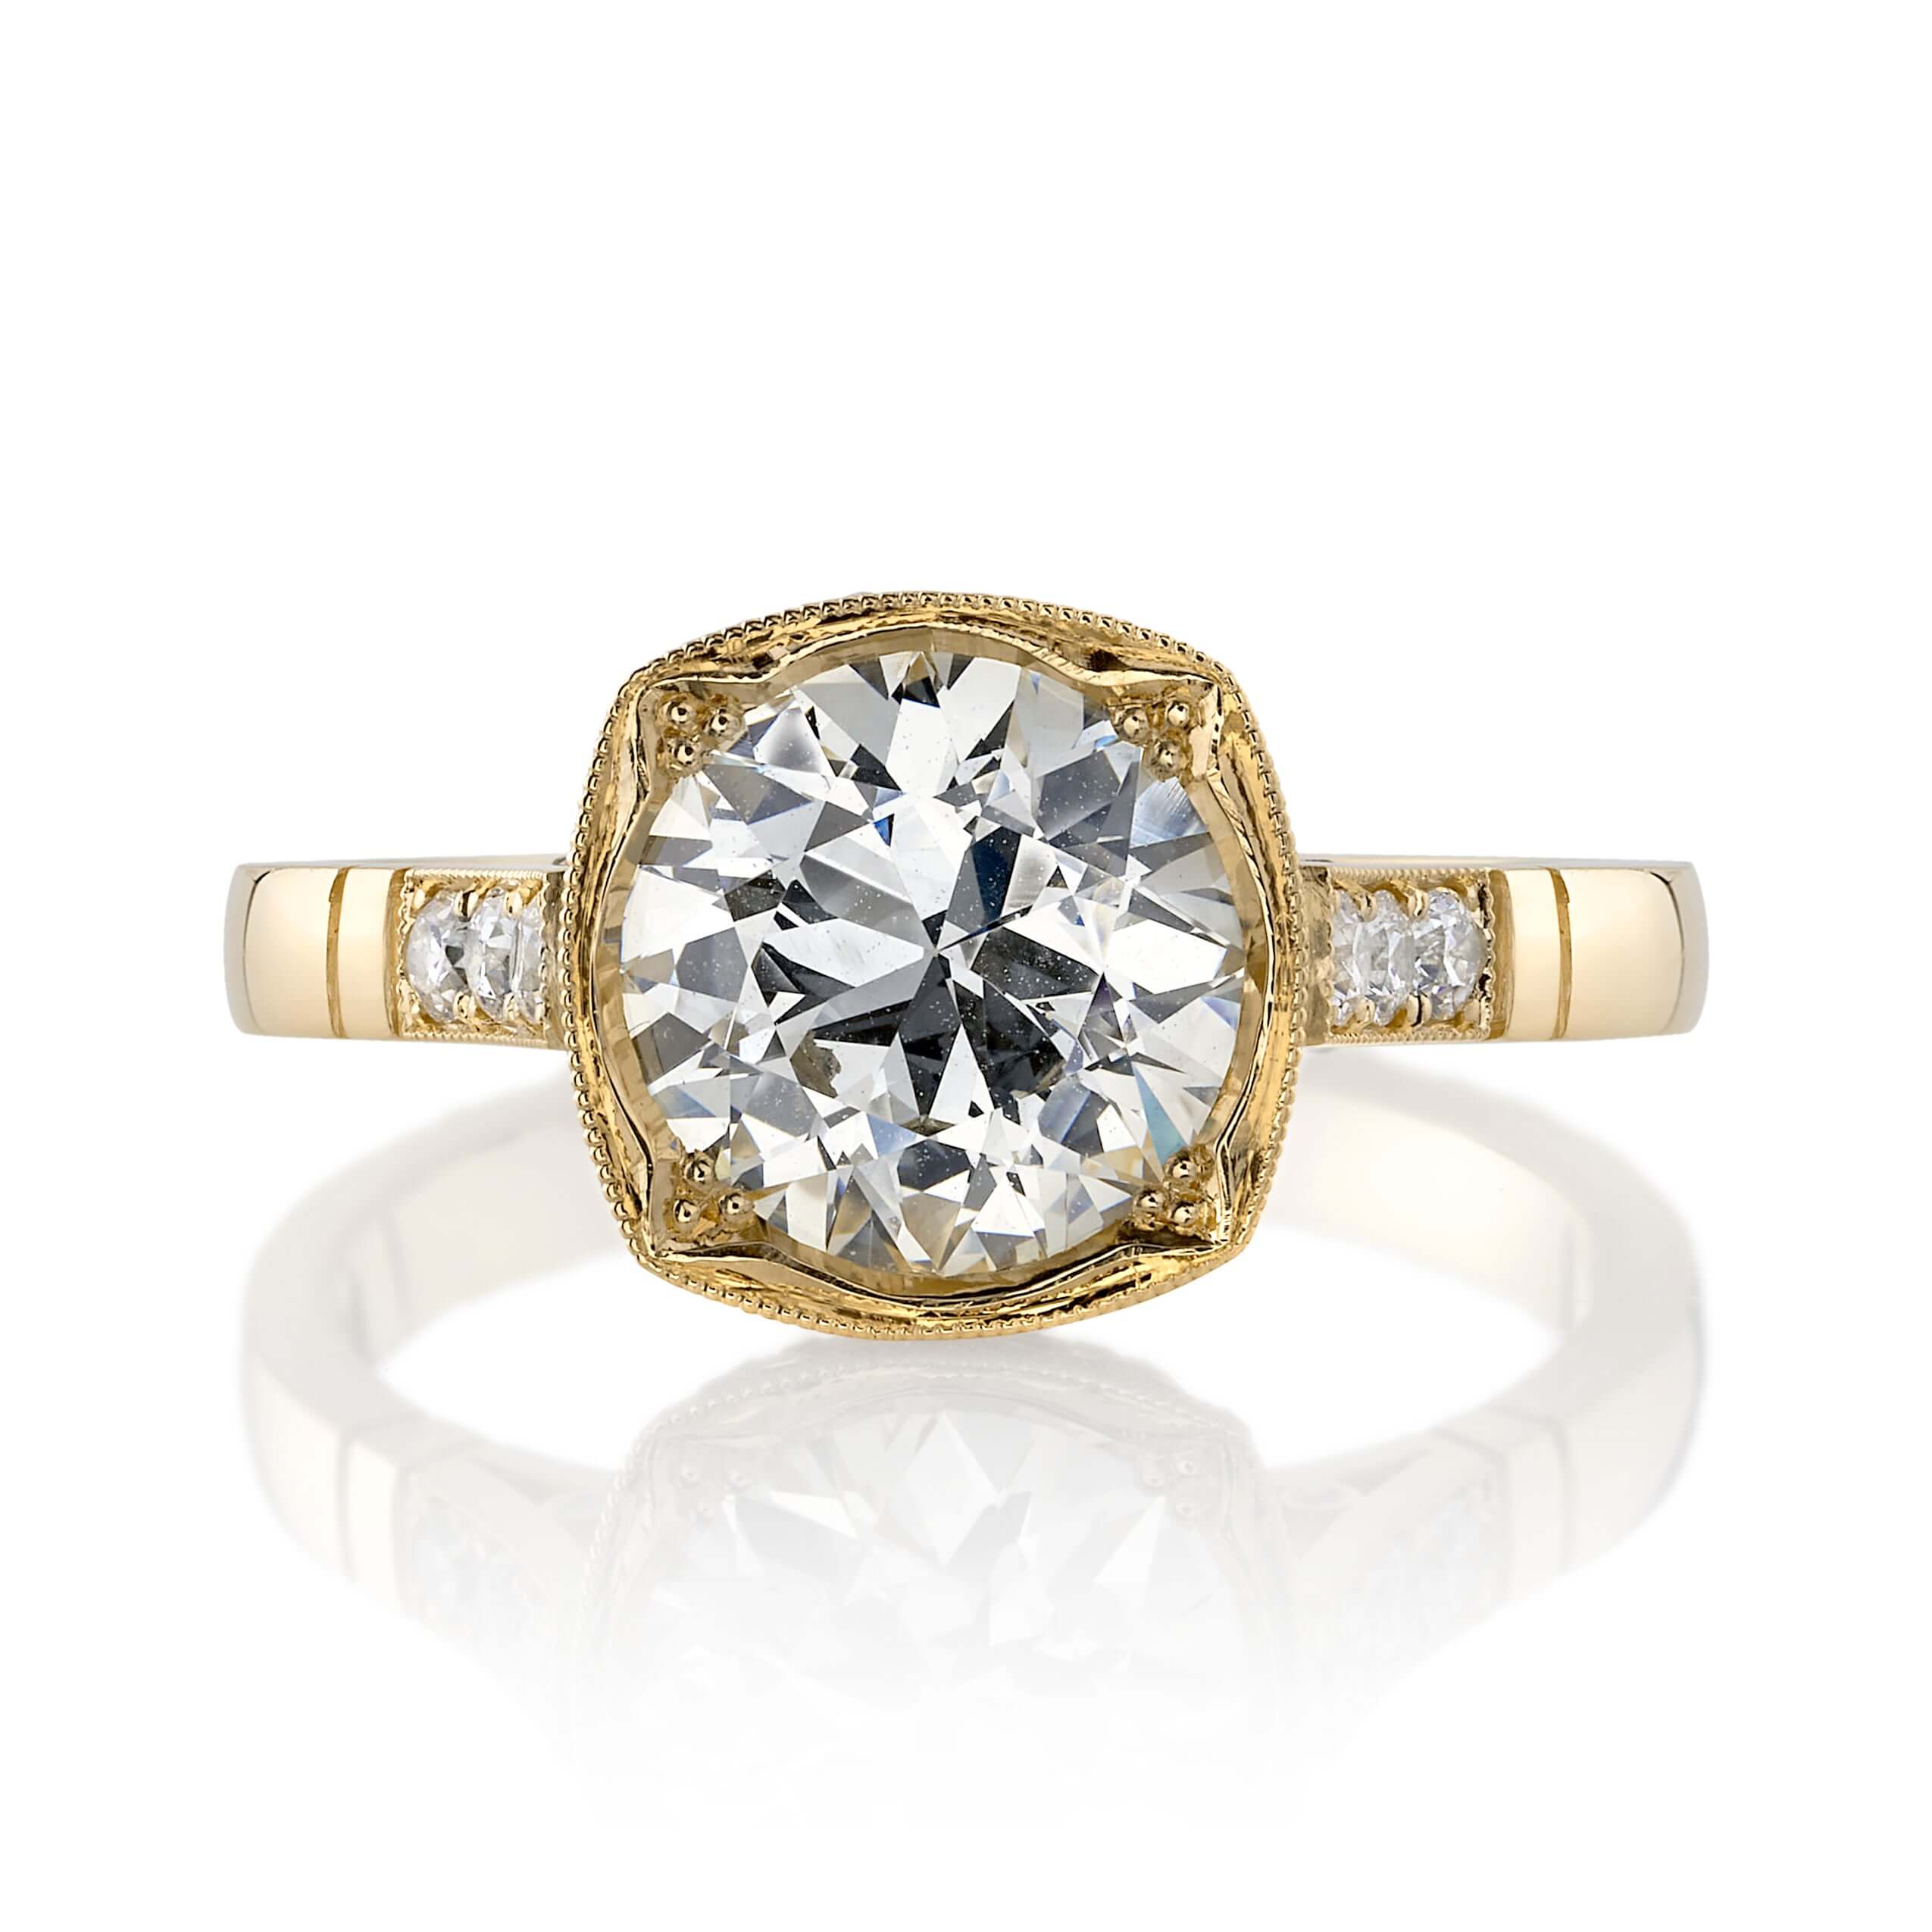 SINGLE STONE COLETTE RING featuring 1.73ct N/VVS2 GIA certified old European cut diamond with 0.25ctw old European cut accent stones set in a handcrafted 18K yellow gold mounting.